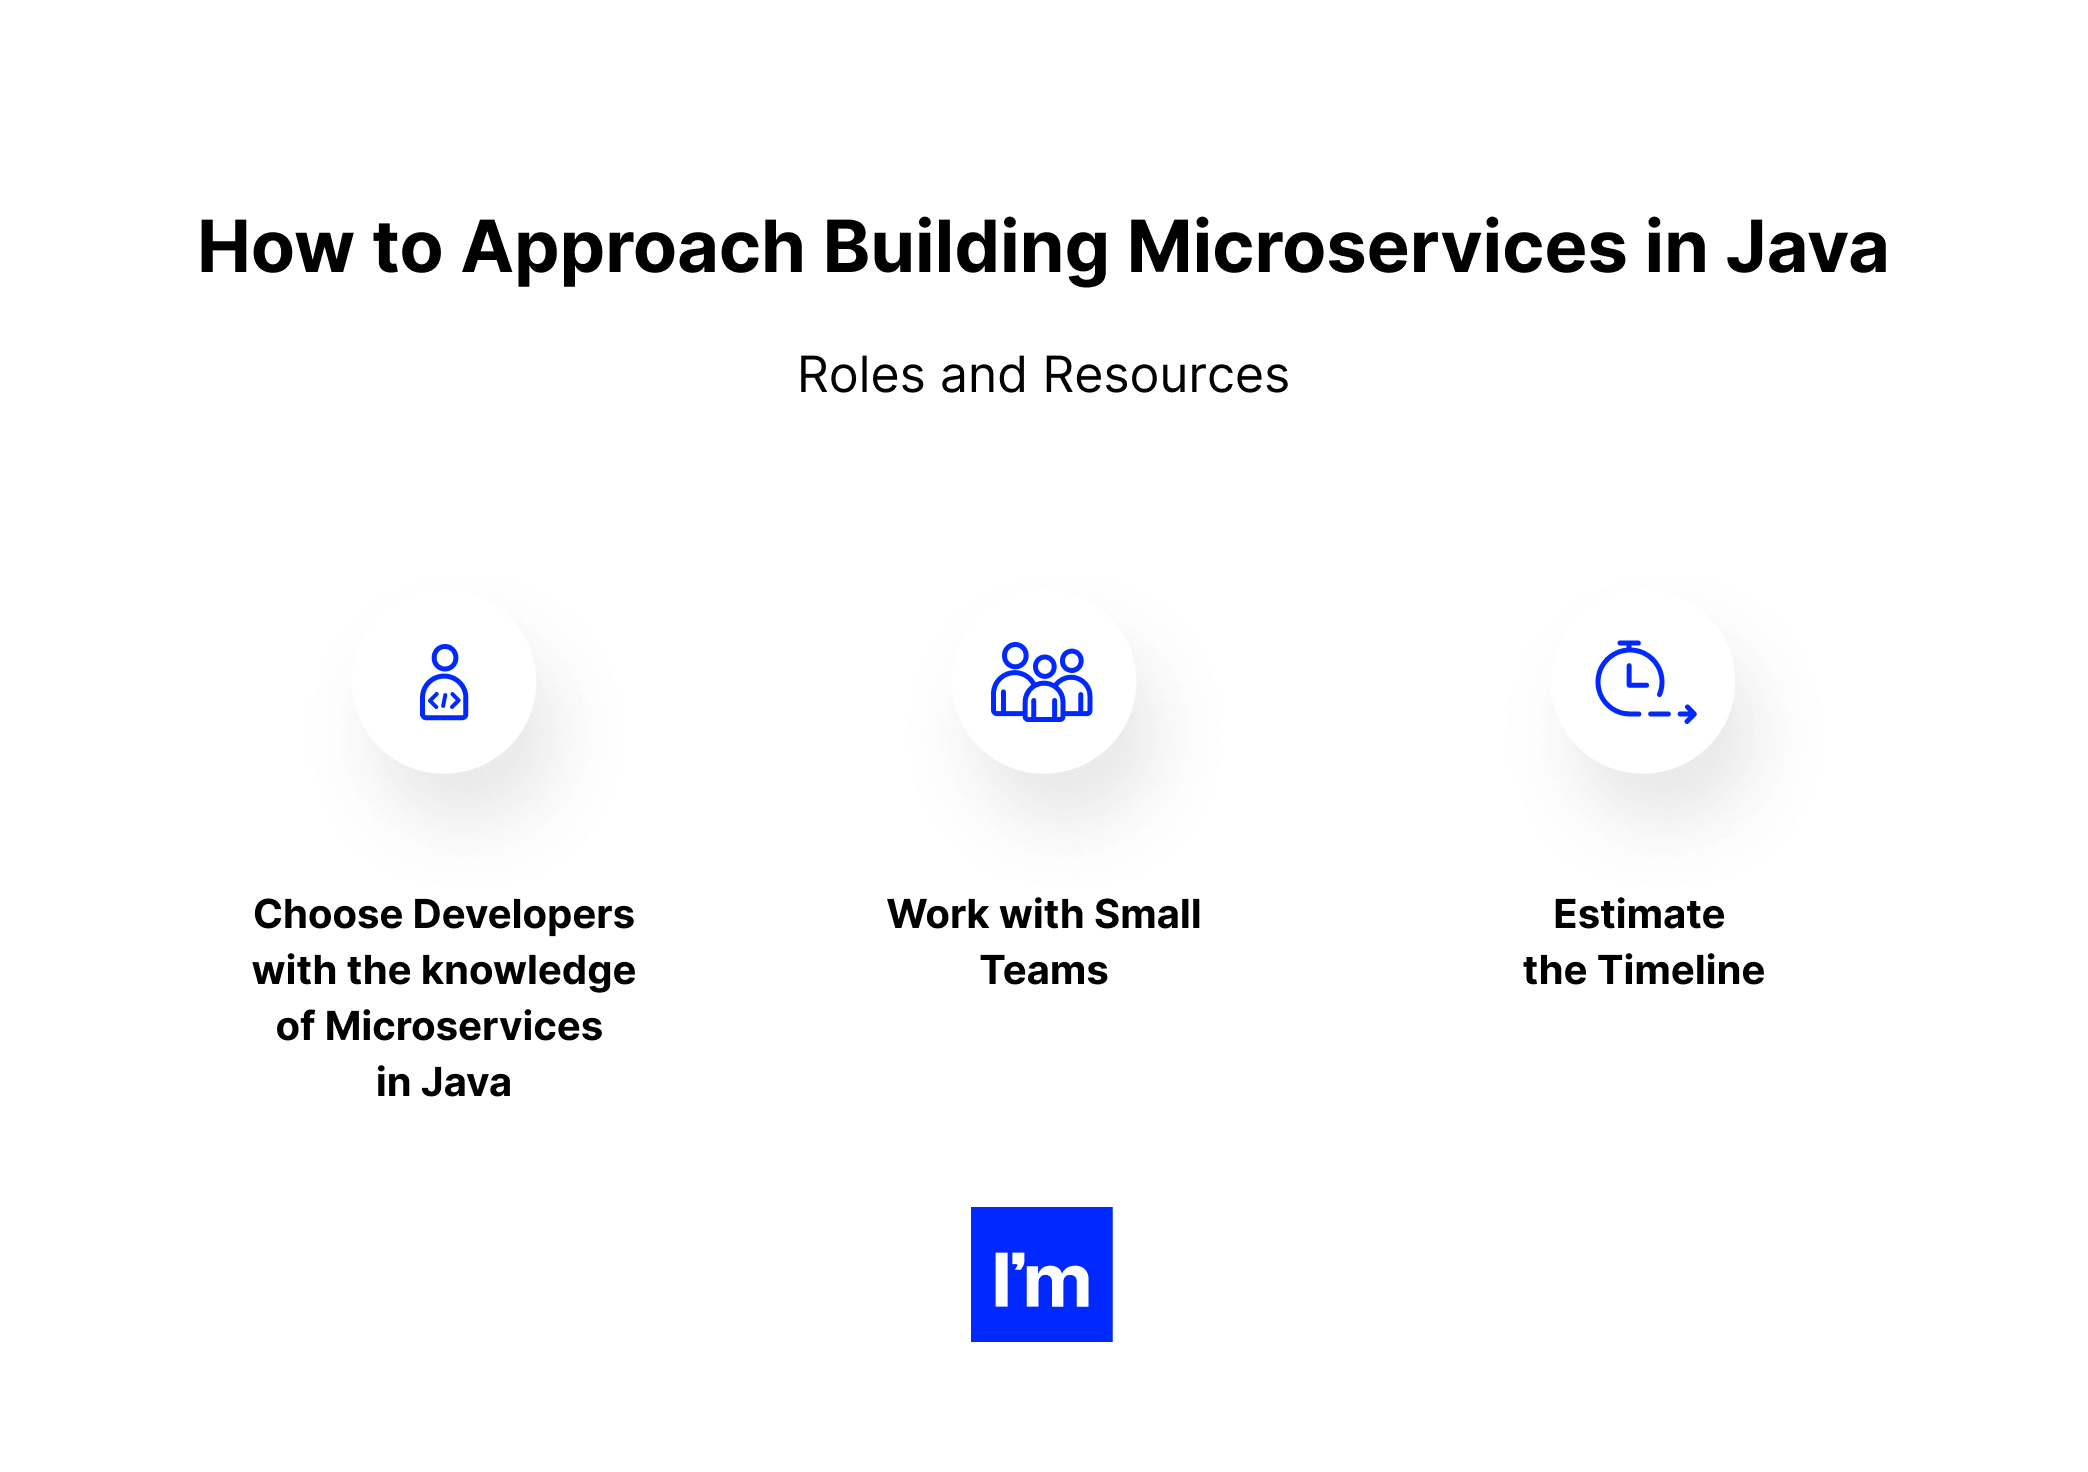 Building Microservices In Java - infographic 2